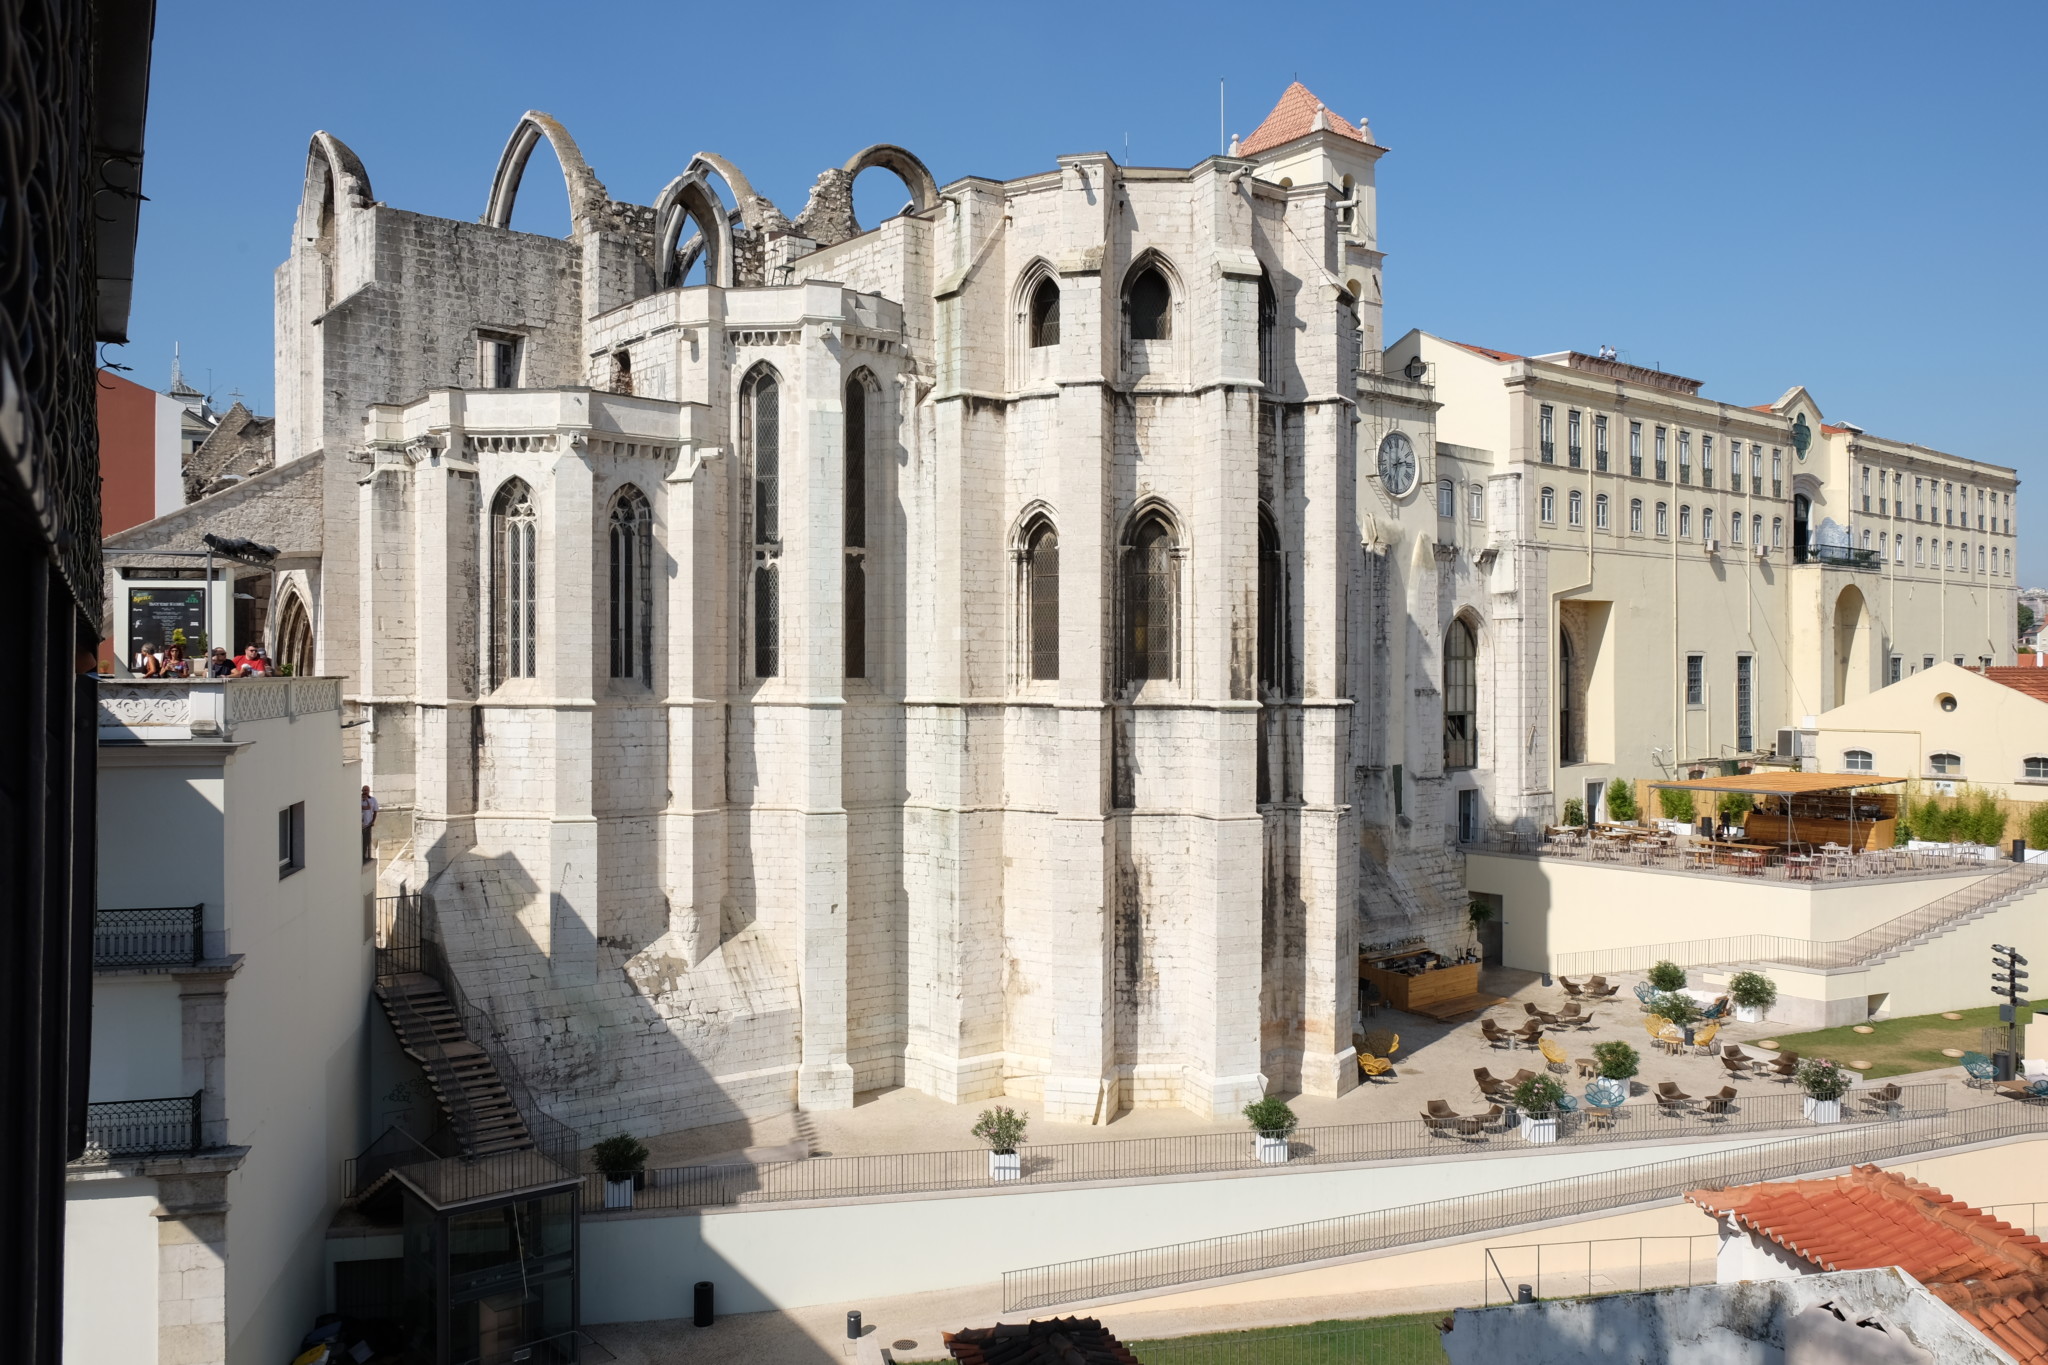 The Carmo Convent from the Santa Justa Elevator